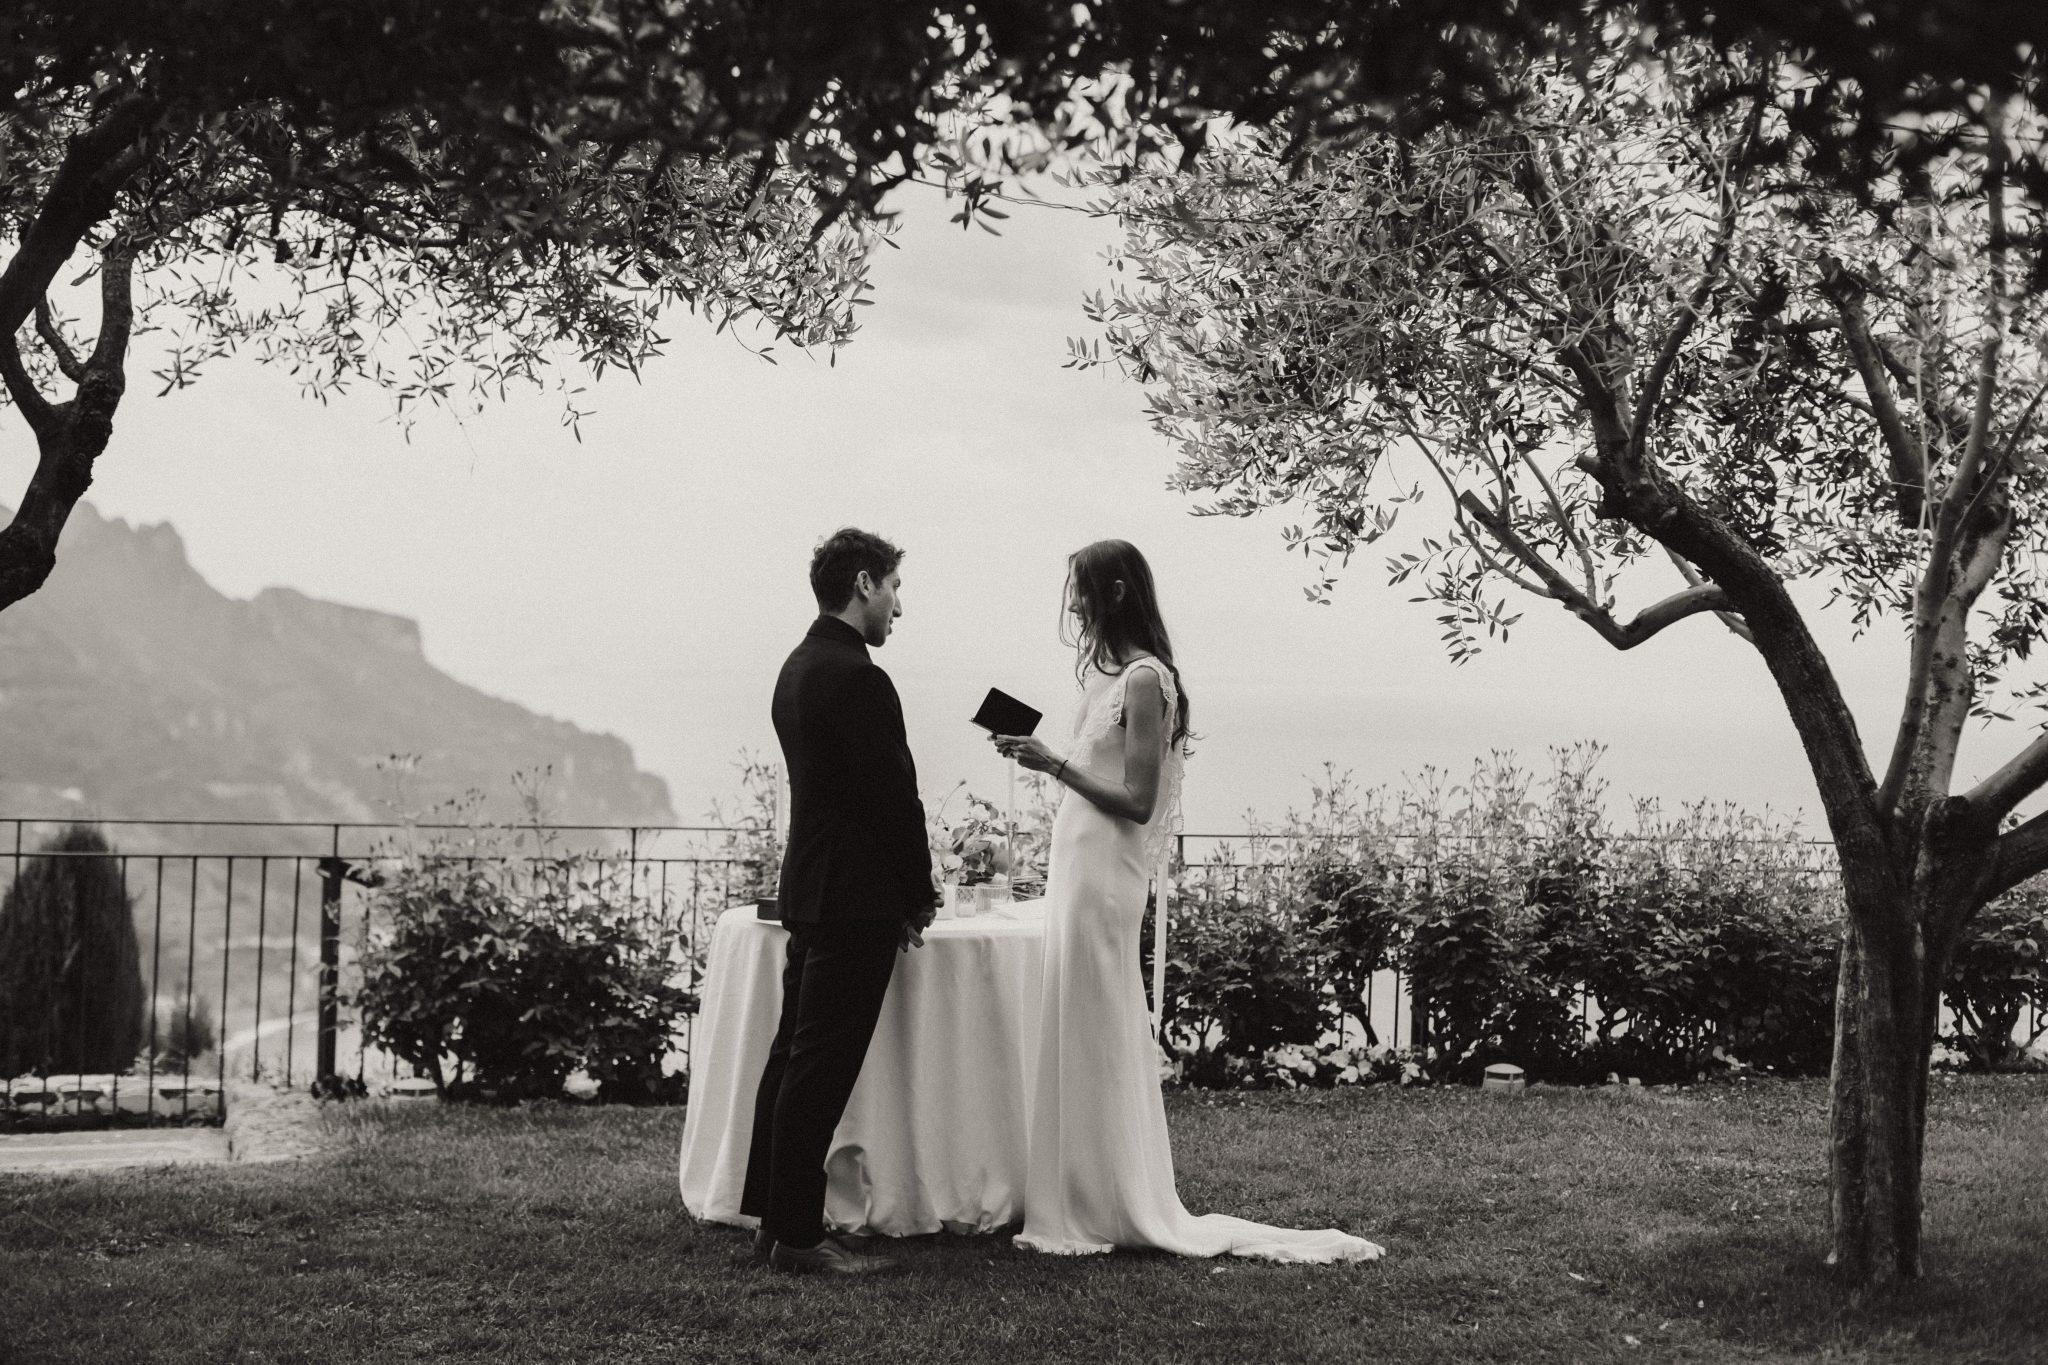 Bride and groom exchanging vows during an outdoor ceremony at the Belmond hotel in Ravello on their elopement day in Italy